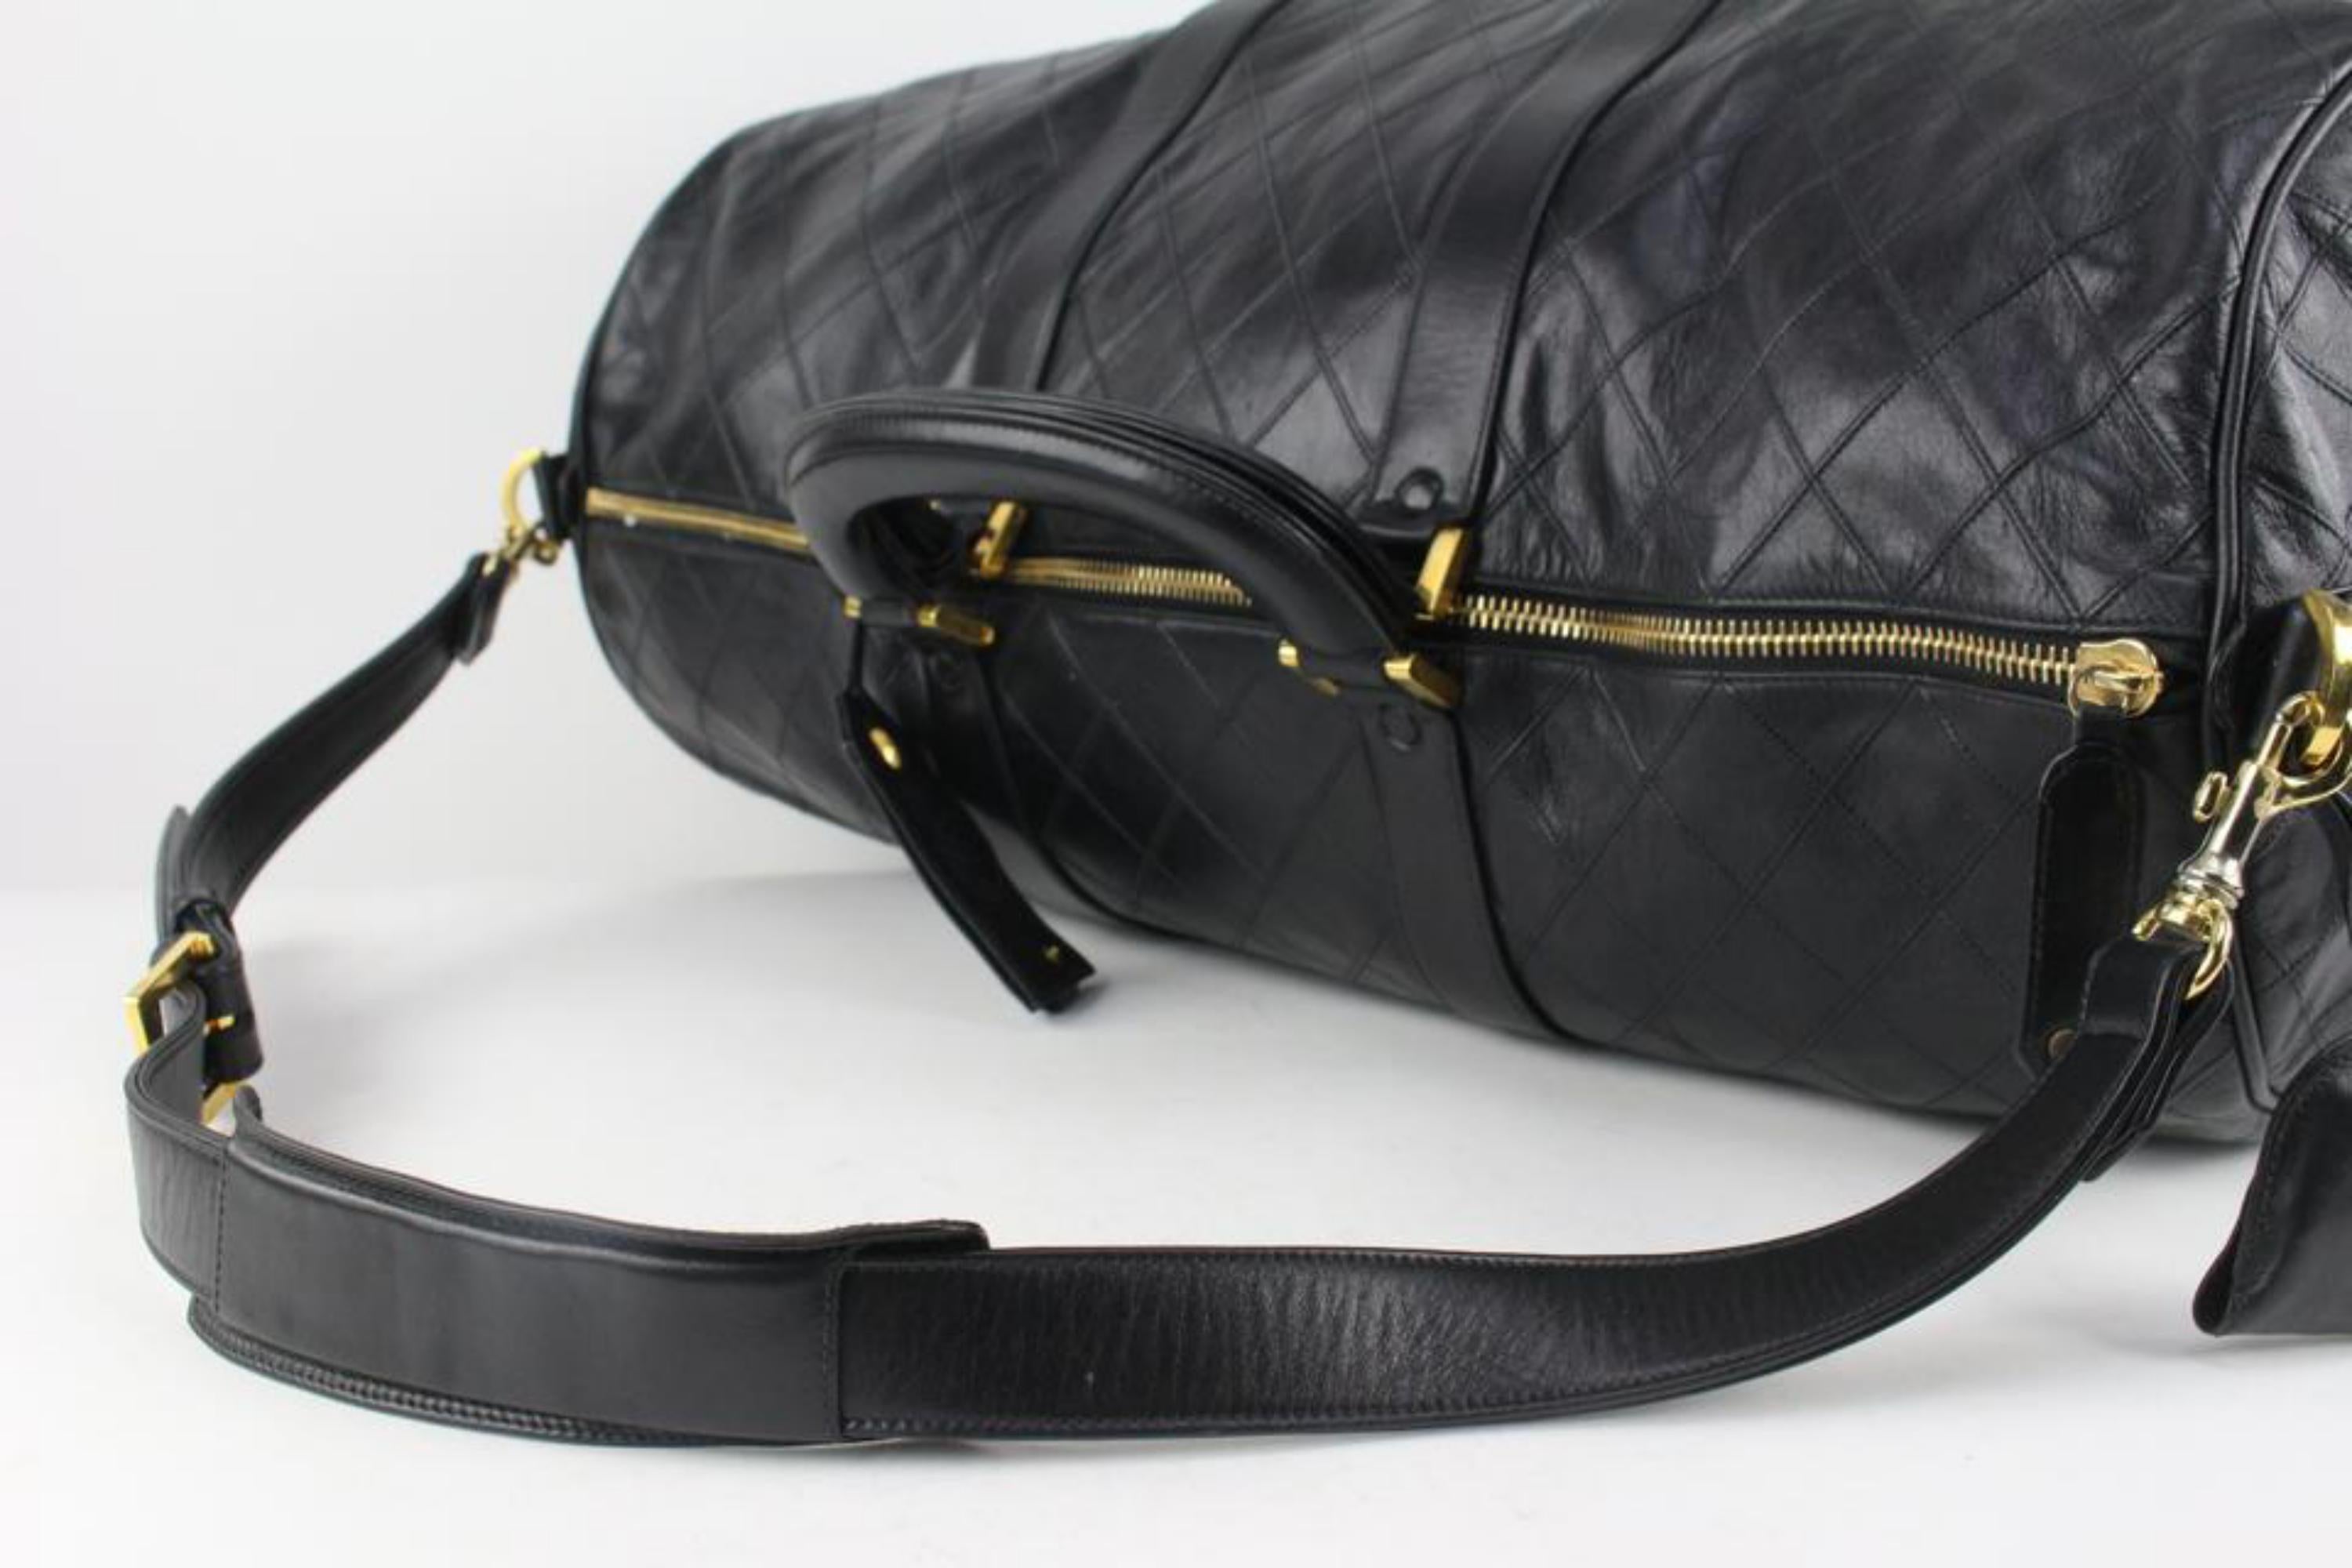 Chanel Black Quilted Lambskin Boston Duffle with Strap 1116c43 2